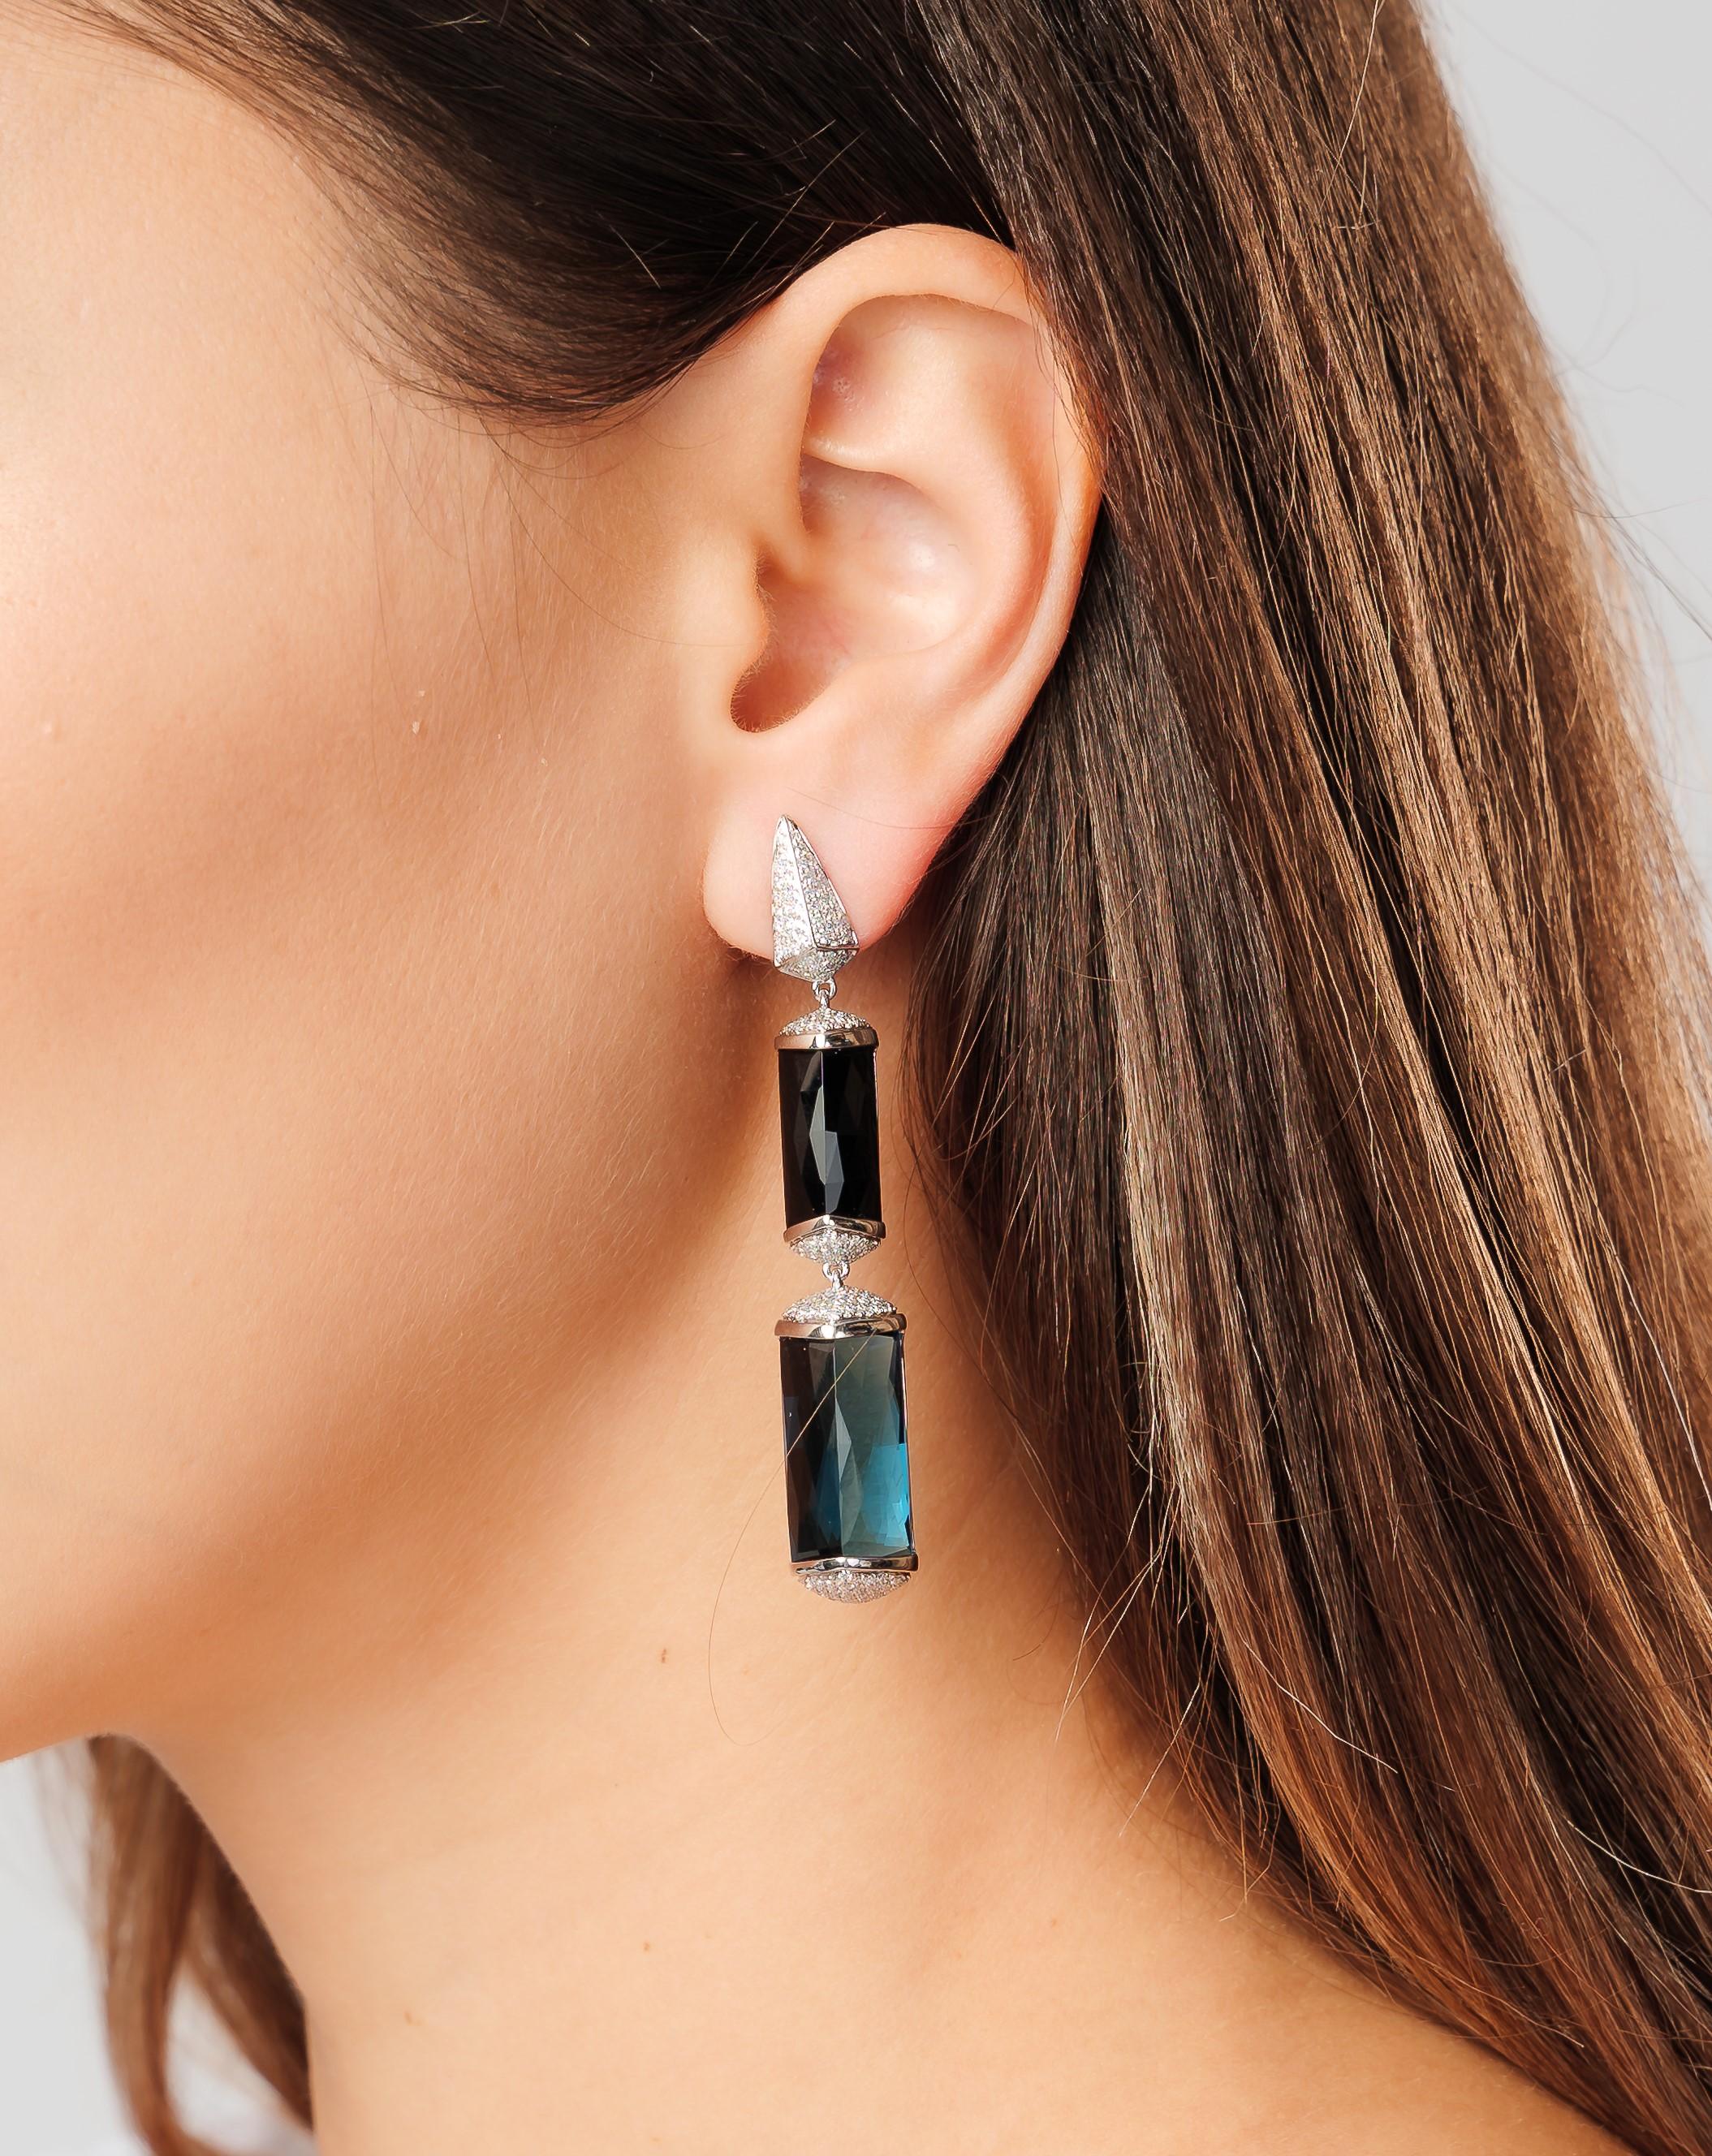 Happy Moods Collection -  this particular collection uses a vibrant variety of color gemstones to reflect the different feelings of happiness. Presenting our unique mismatch gemstone earrings perfect for winter evenings featuring London Blue Topaz